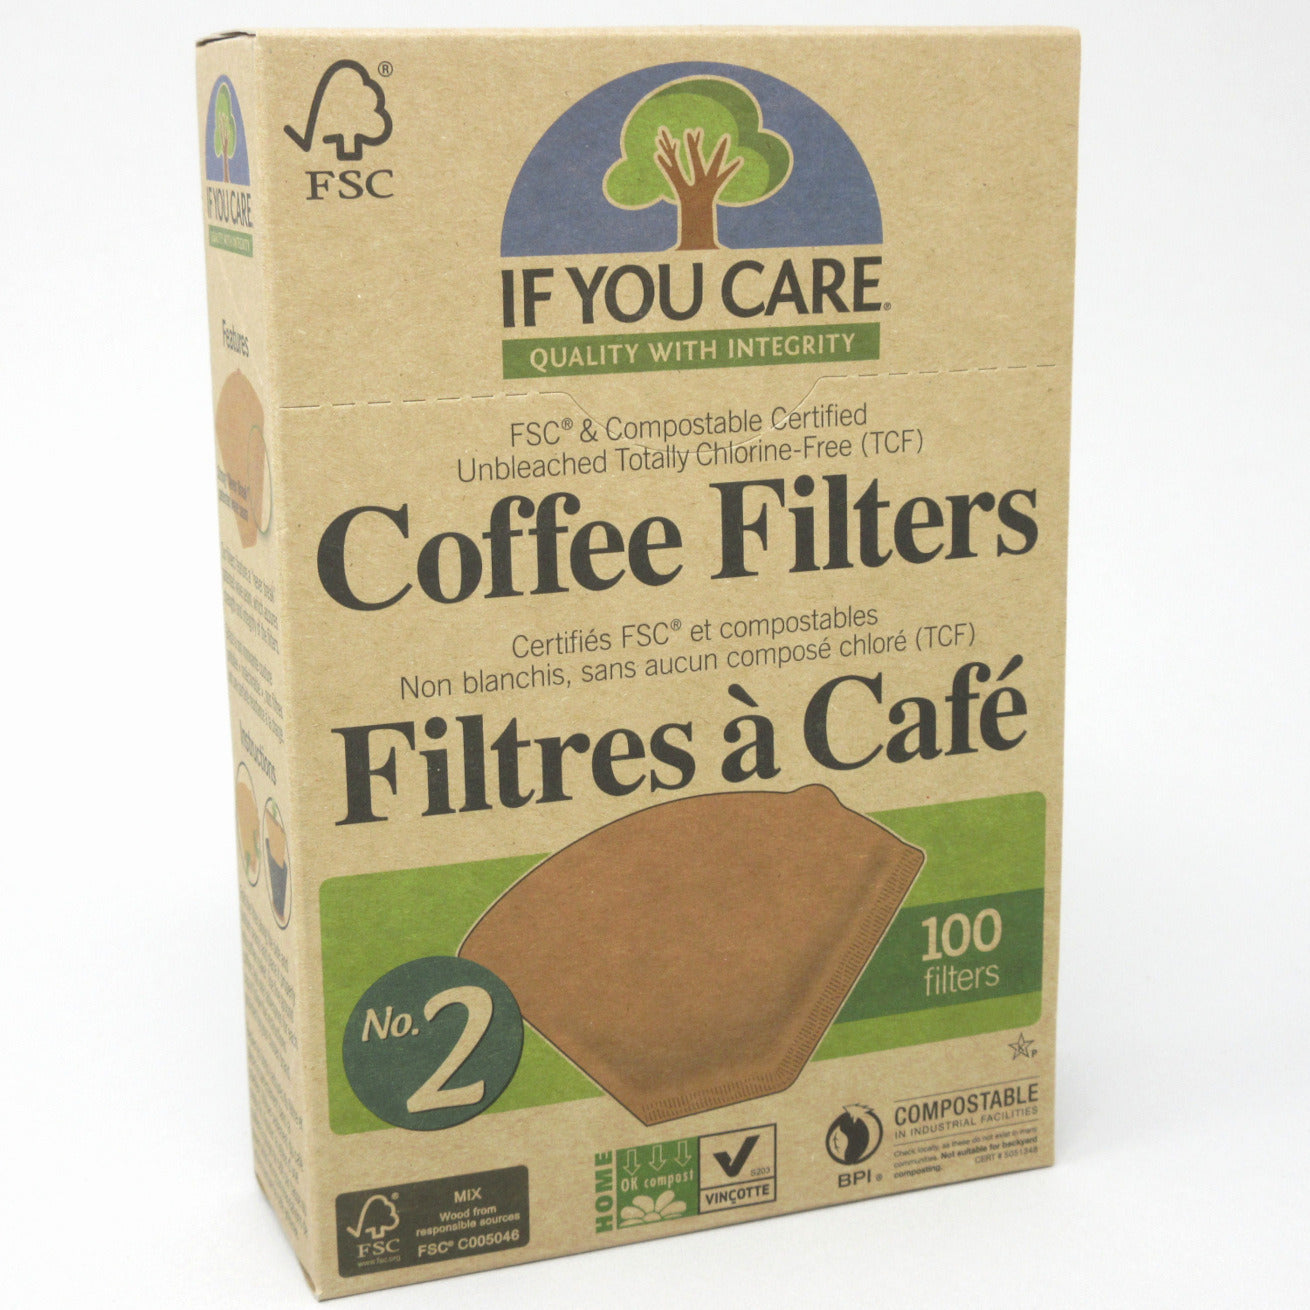 Flour Barrel product image - If You Care Coffee Filters